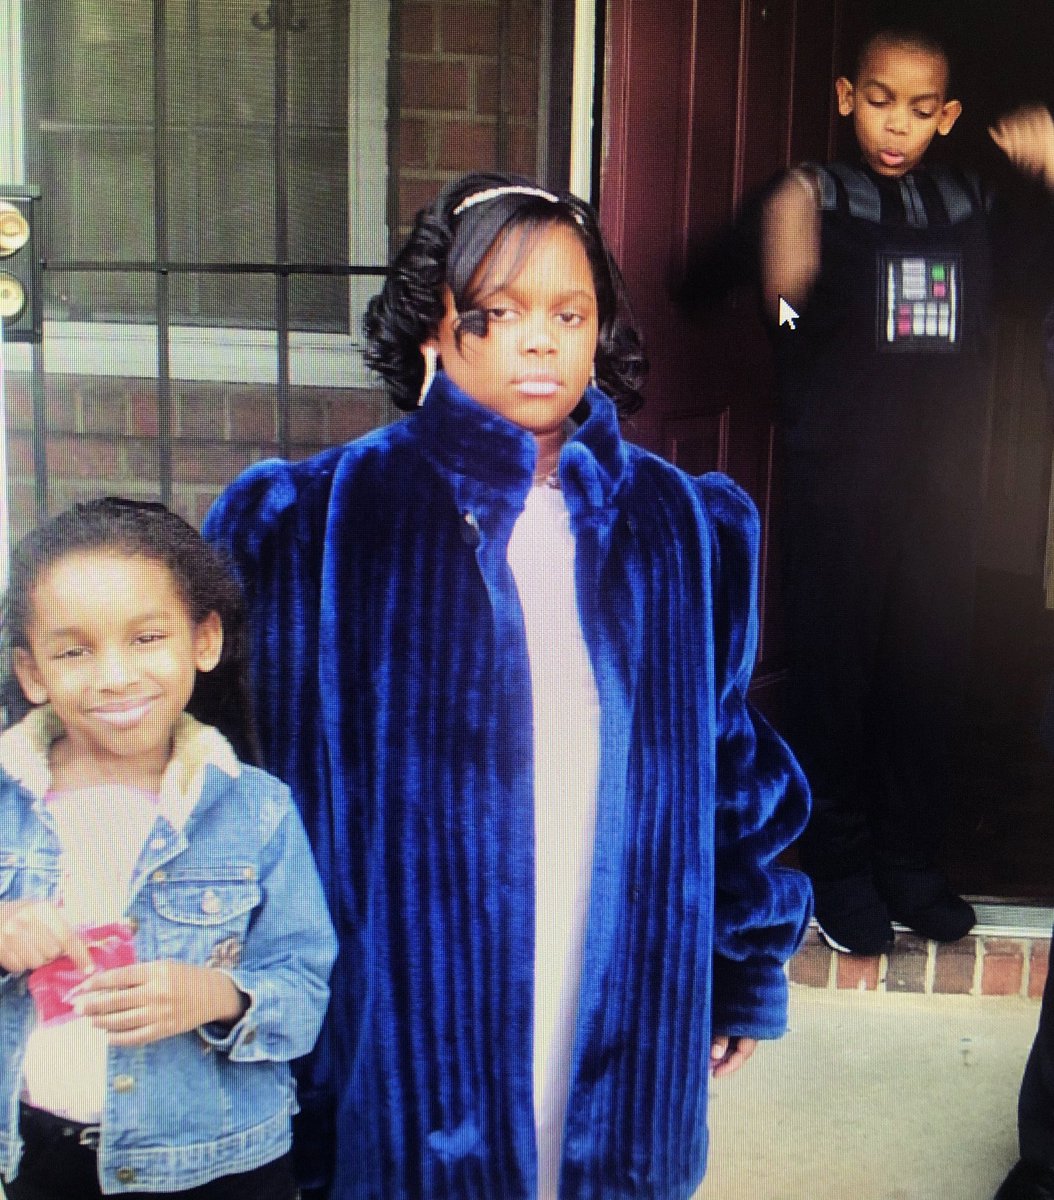 Why my mamma let me leave the house lookin like somebody’s pimp 🤣